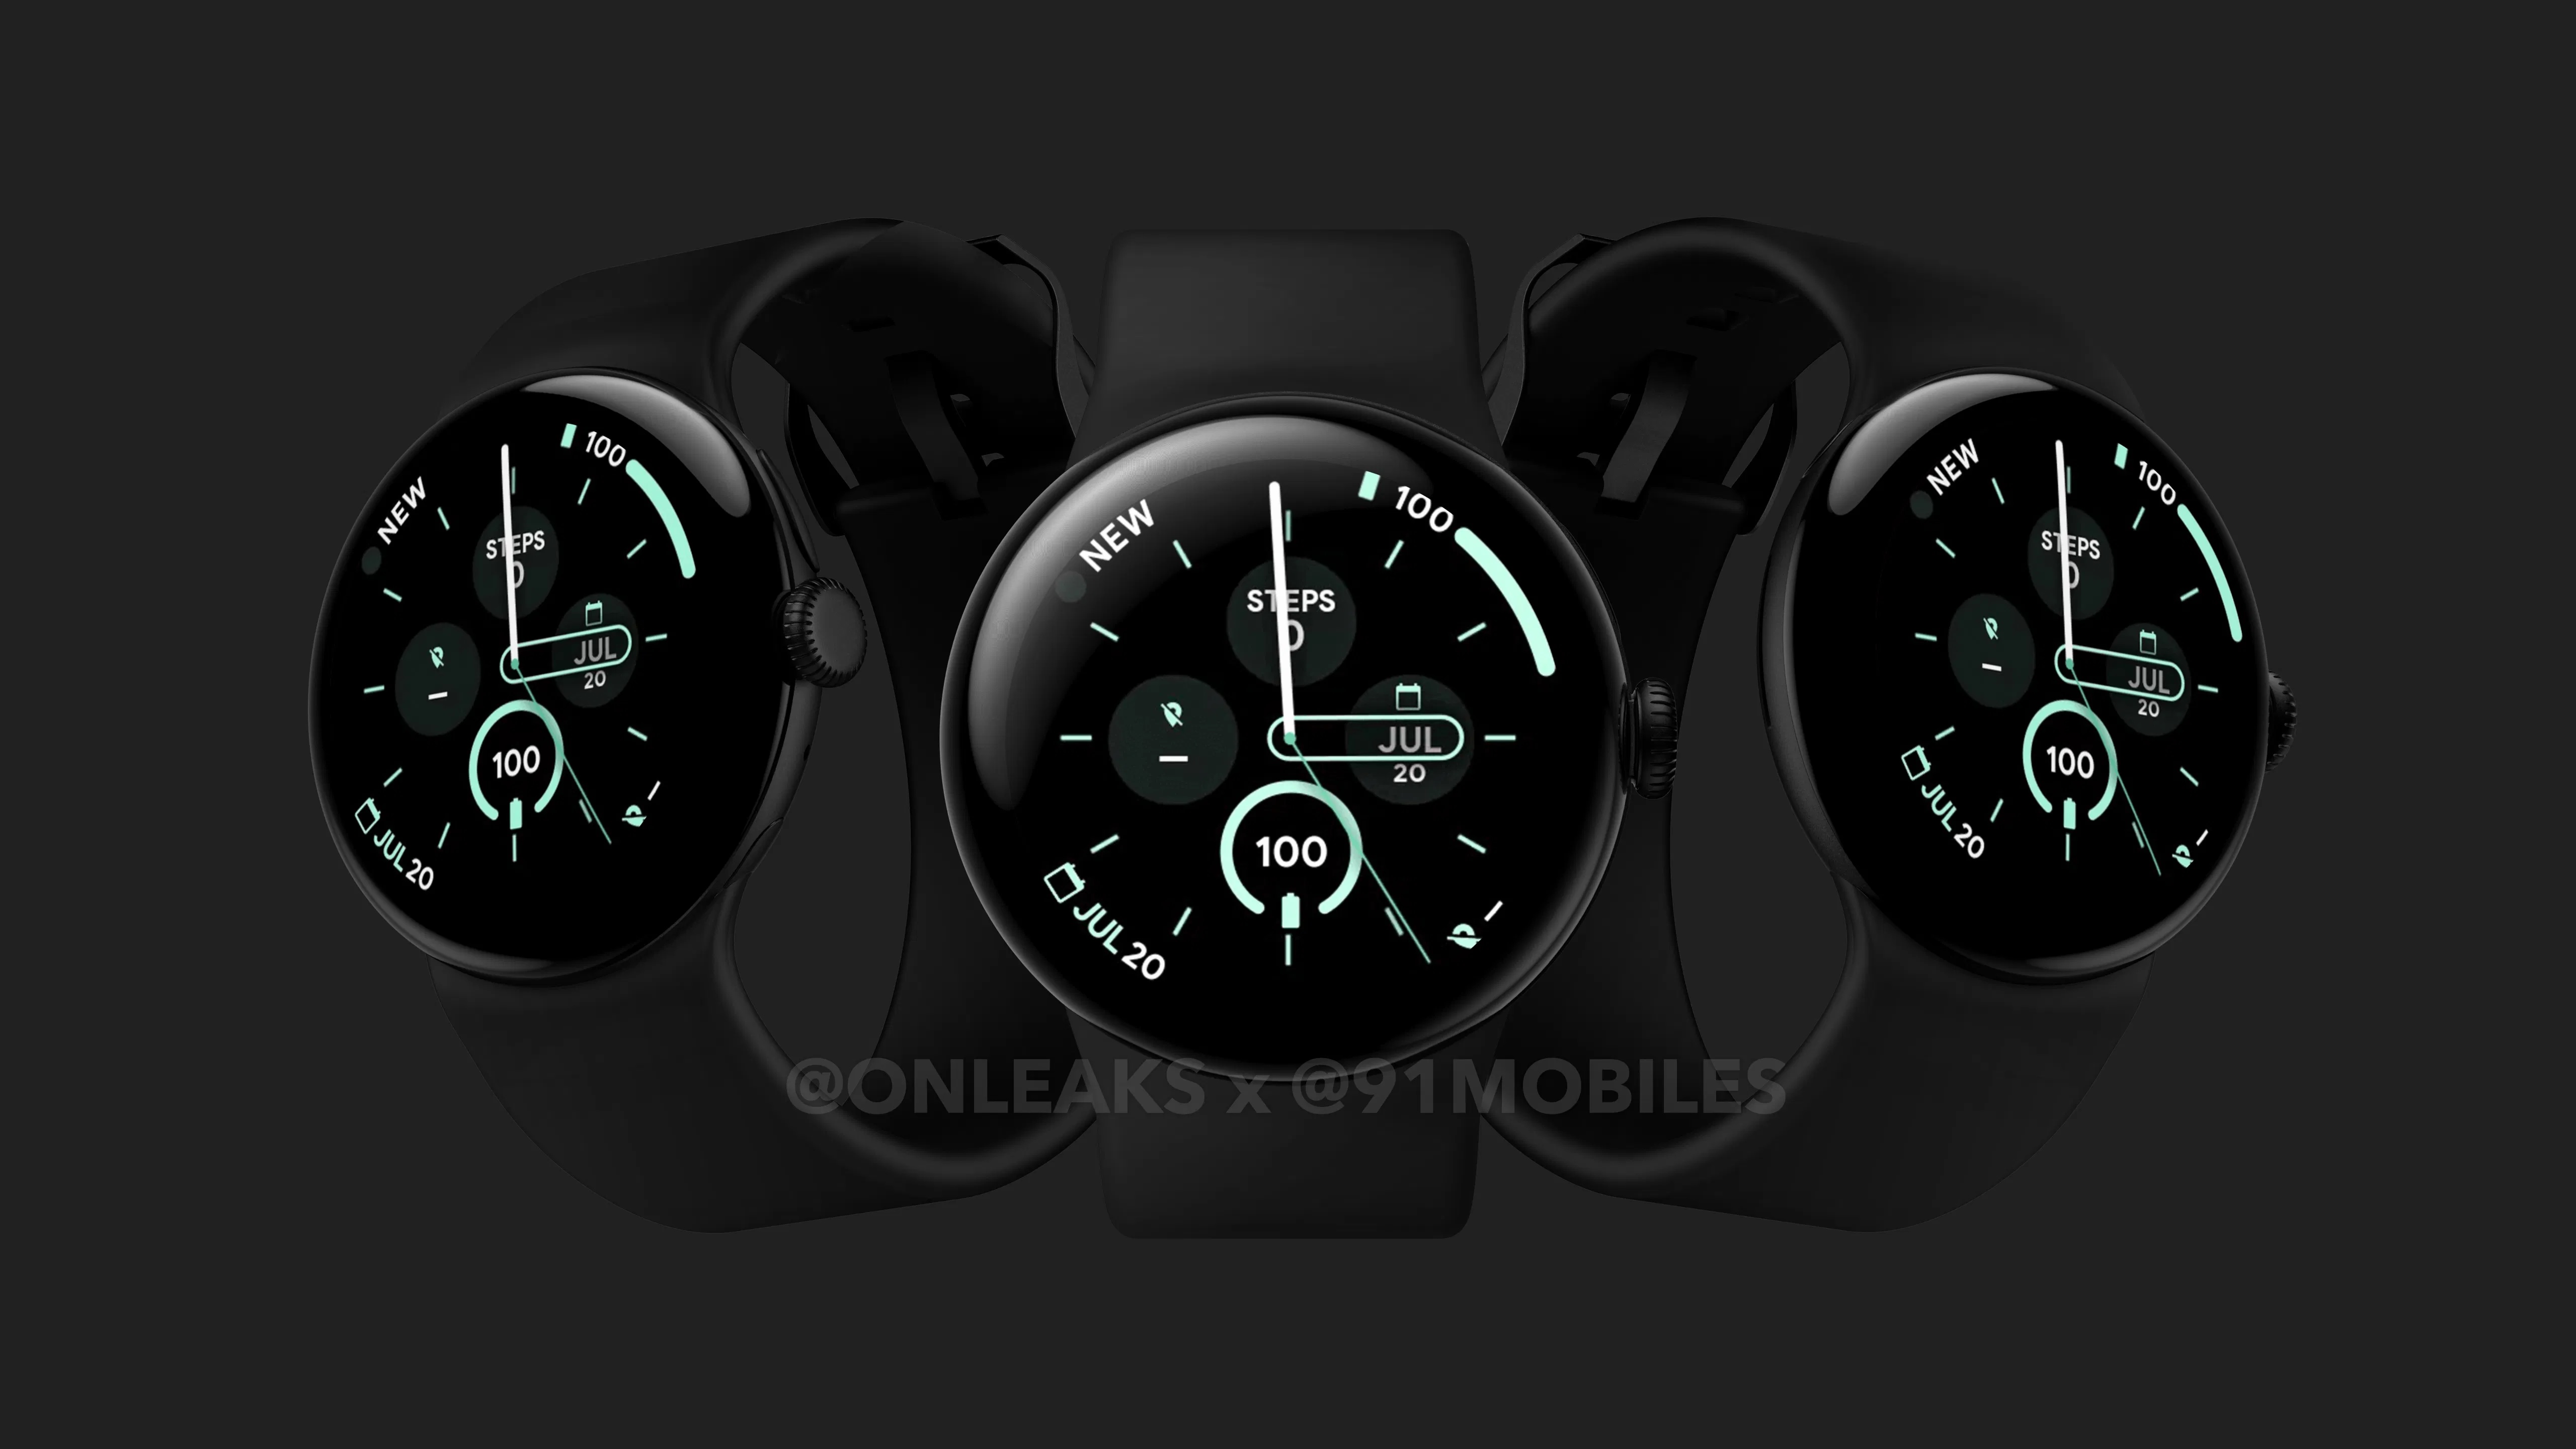 Images showing a rendering for the Google Pixel Watch 3.